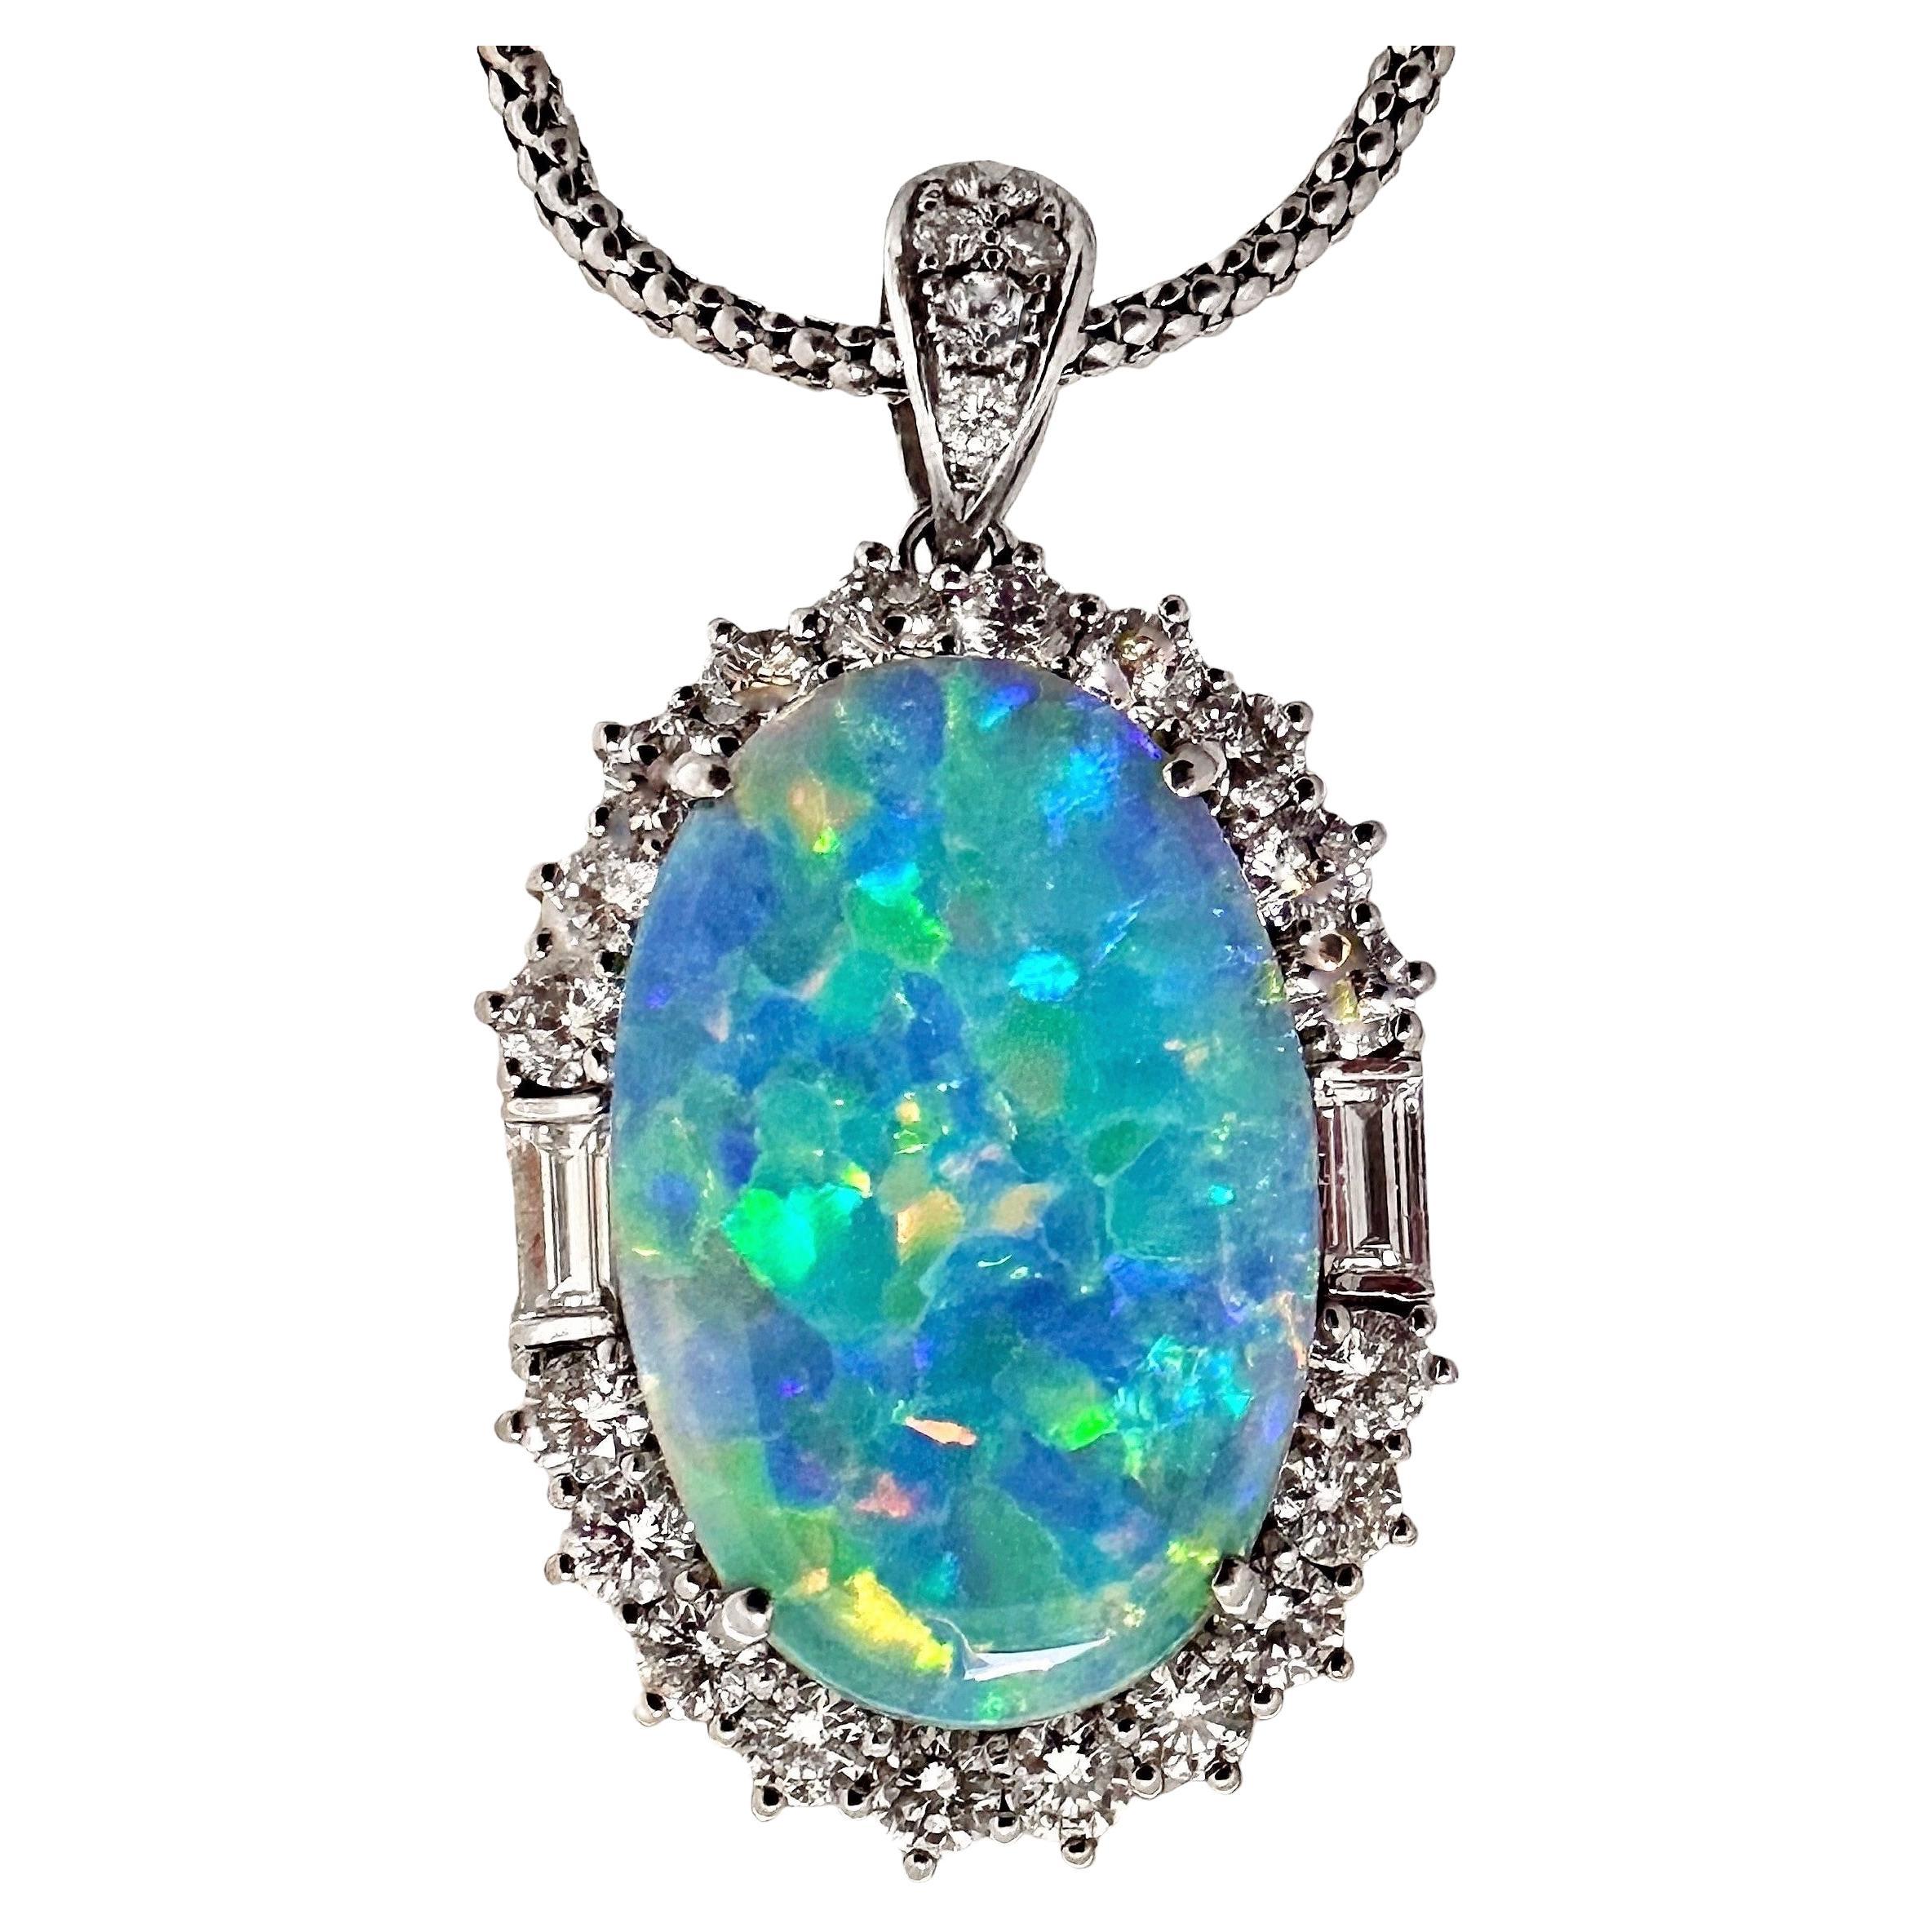 Classic Platinum Pendant with Opal Center Surrounded by Diamonds